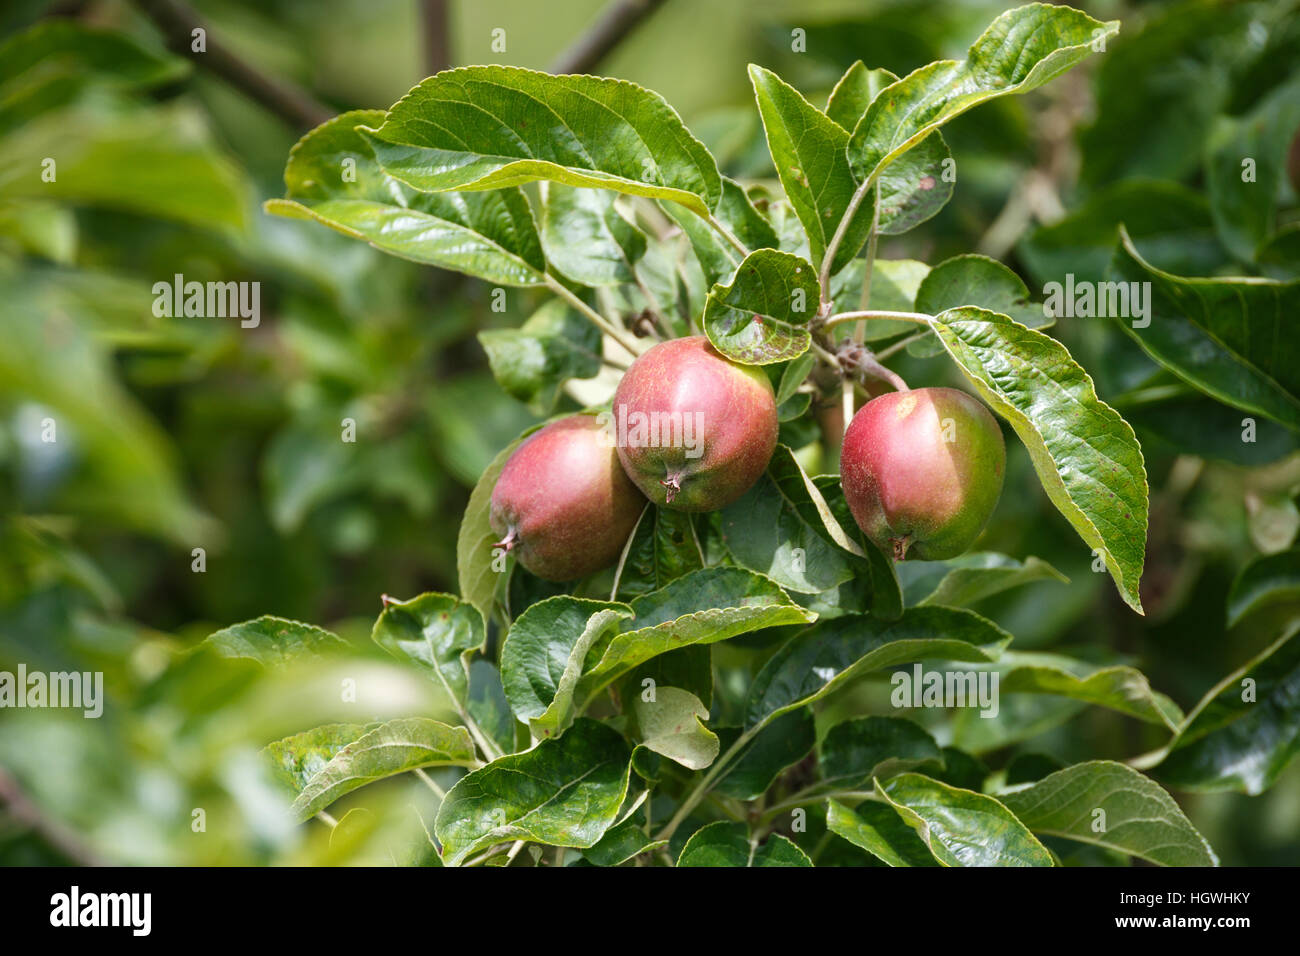 Red apple on branch with green leaves Stock Photo